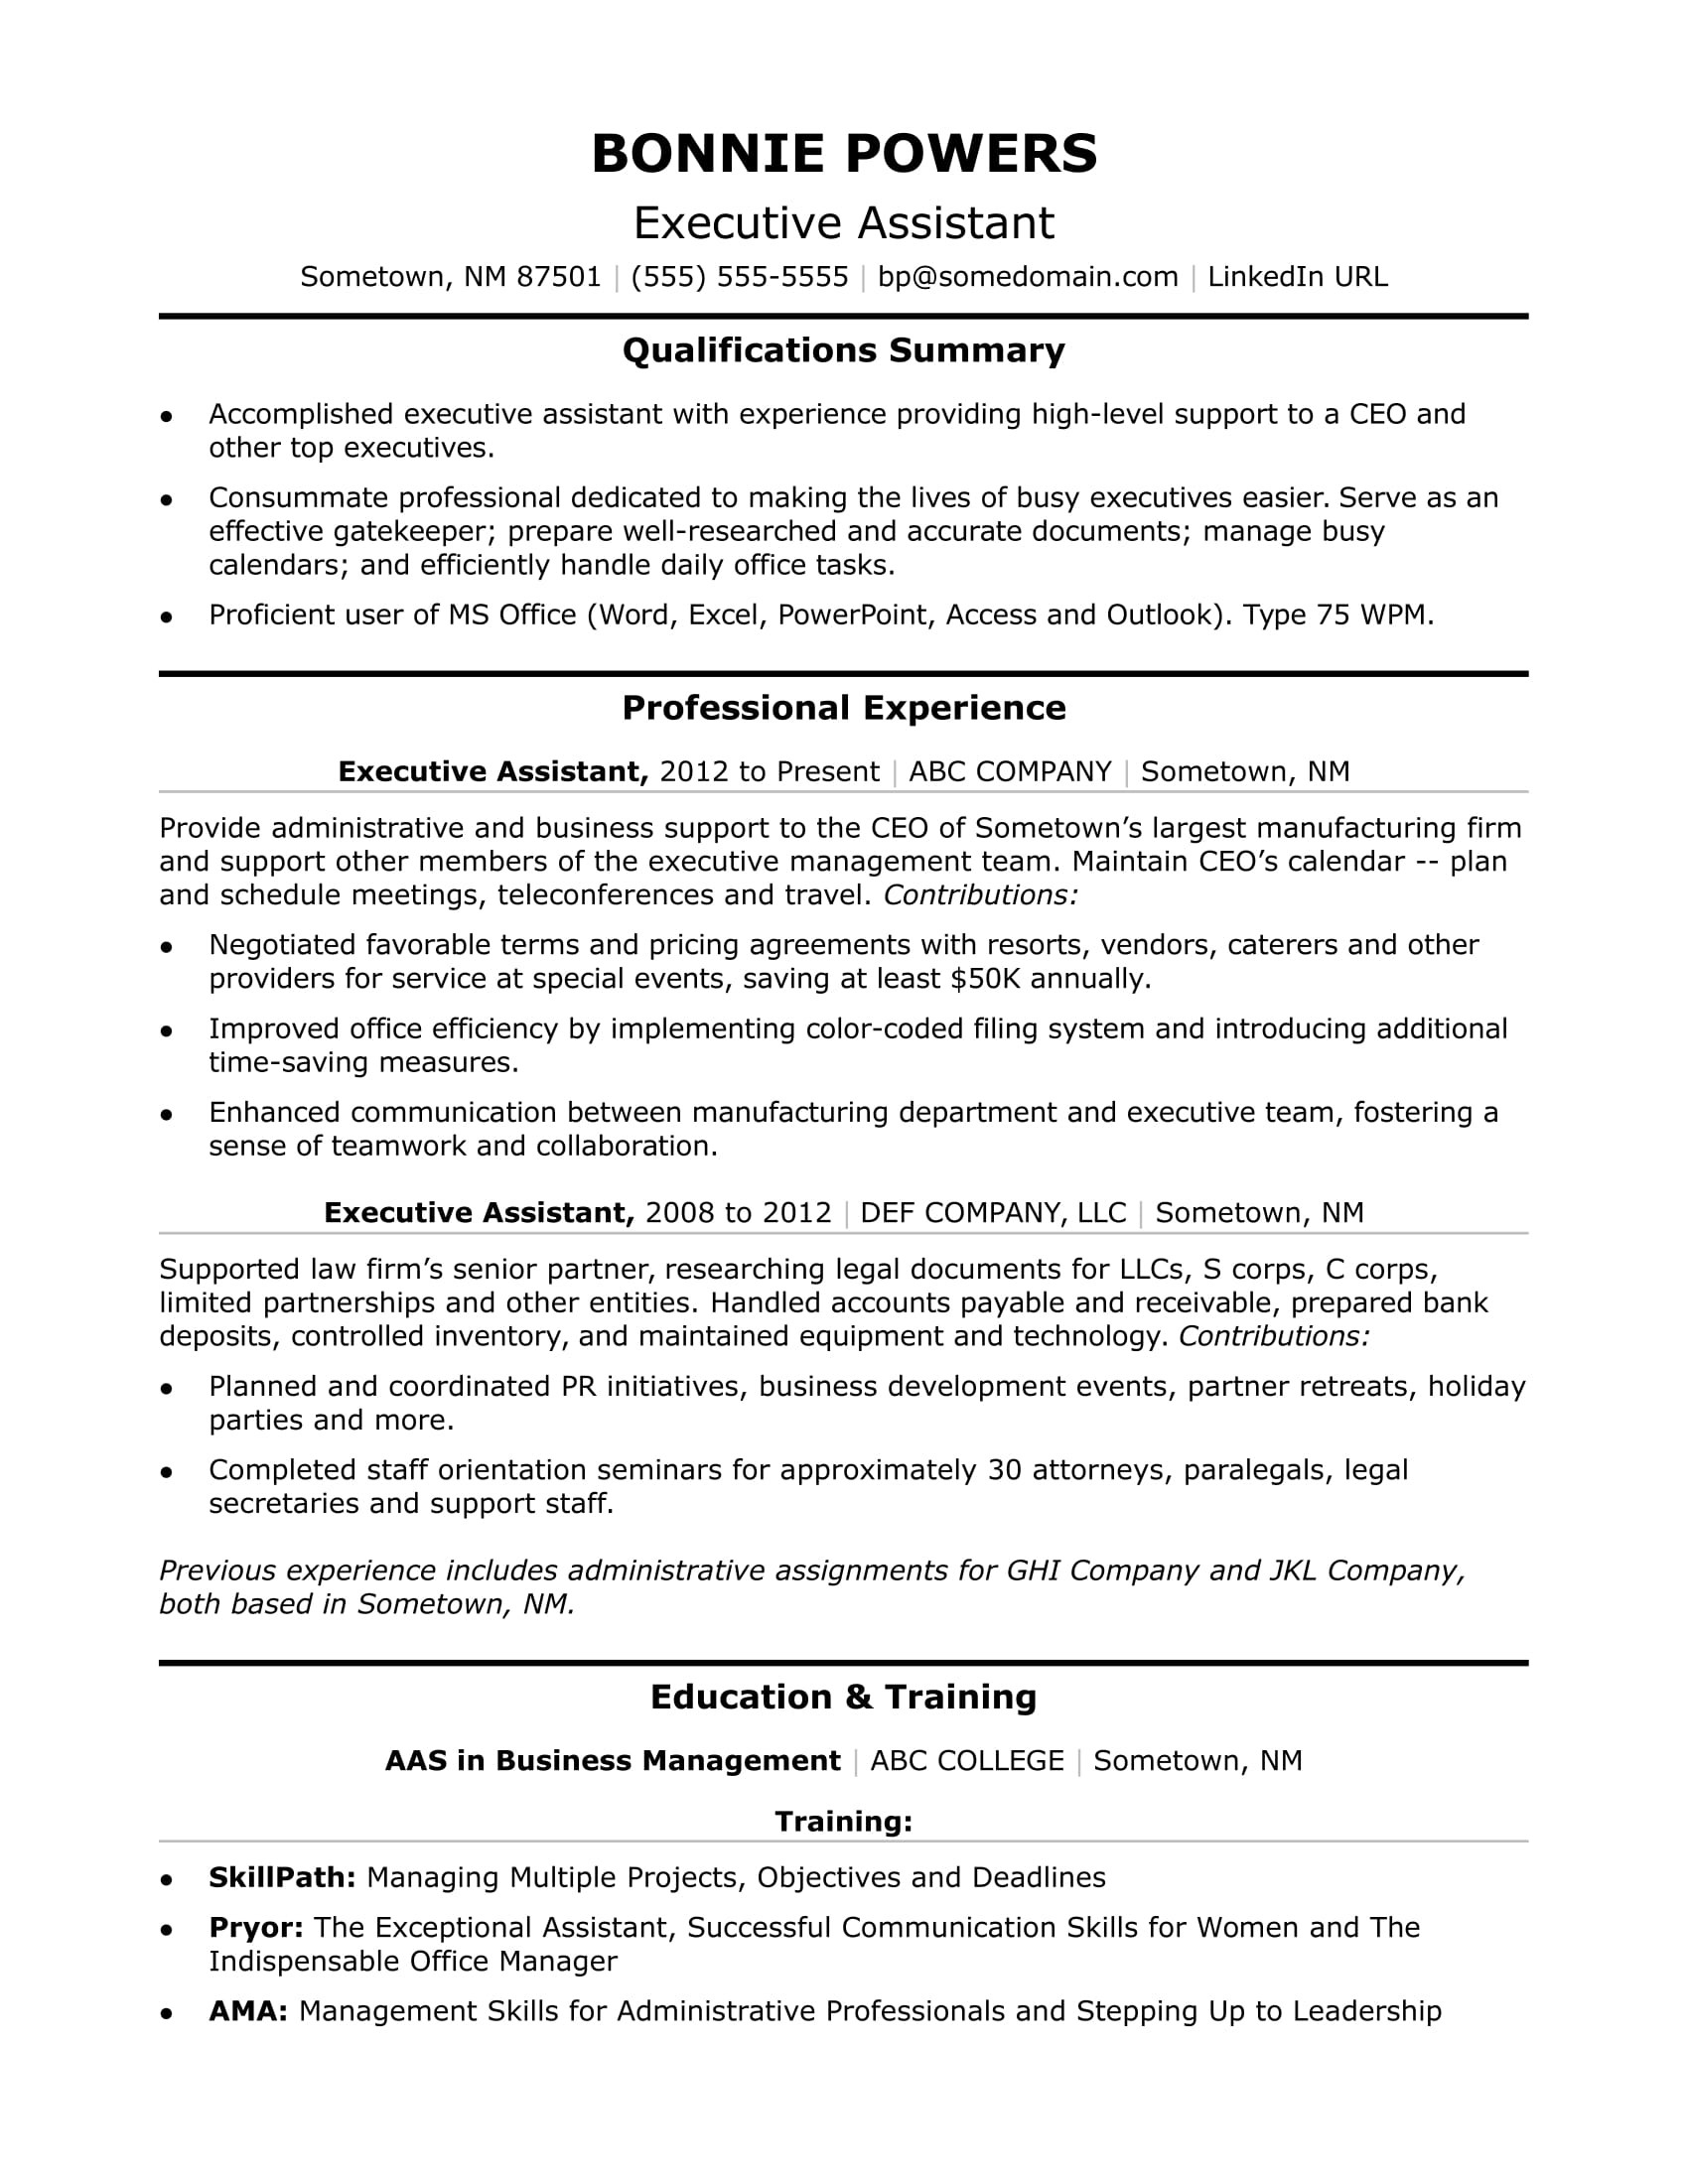 Resume Samples Of A Personal assistant Executive assistant Resume Monster.com